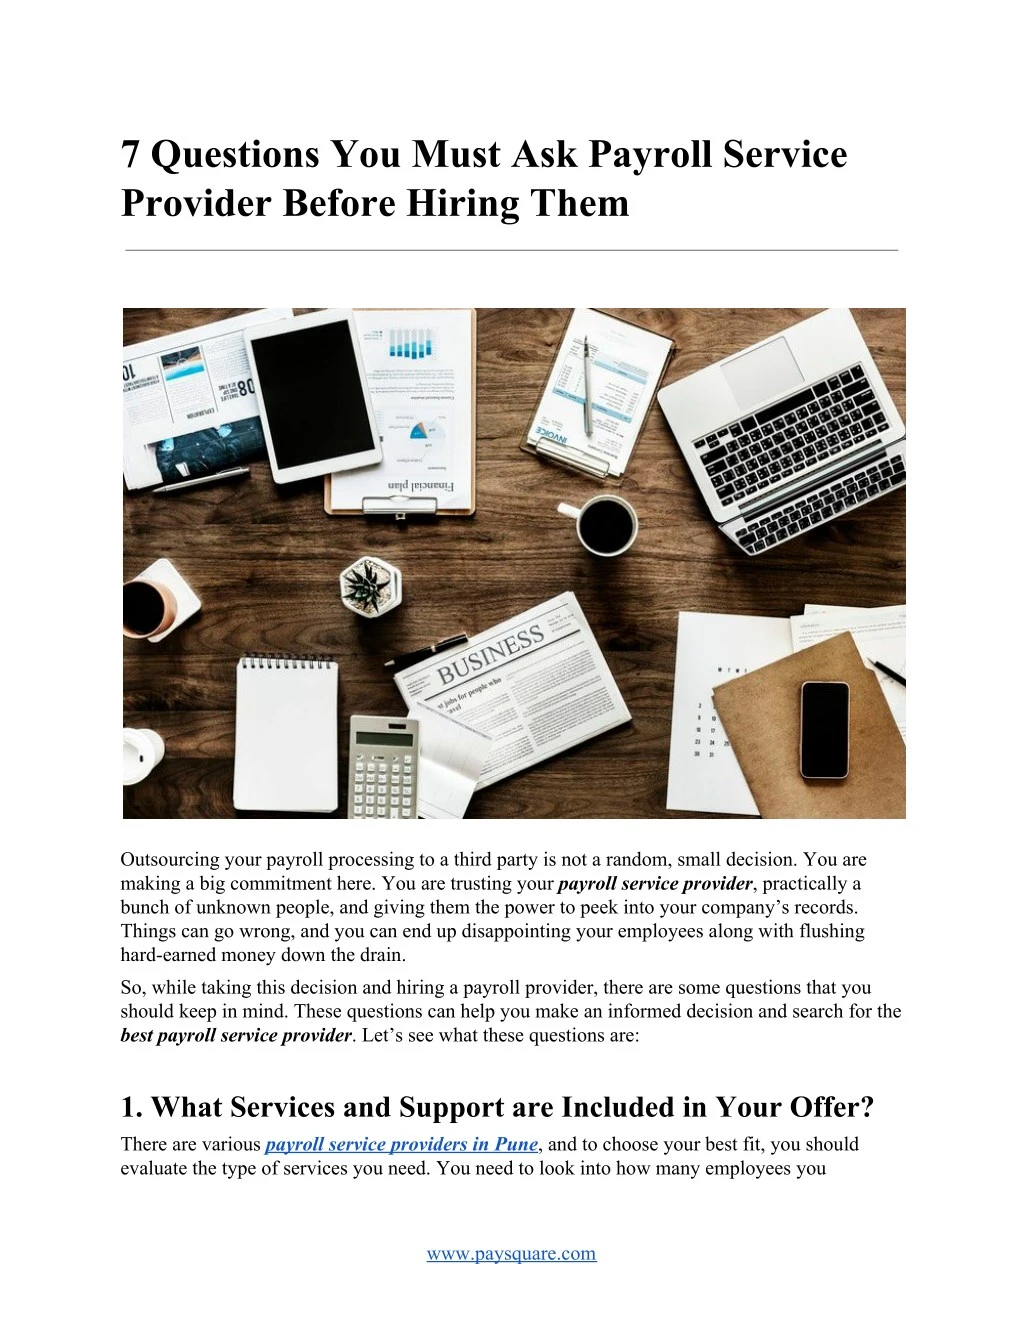 7 questions you must ask payroll service provider